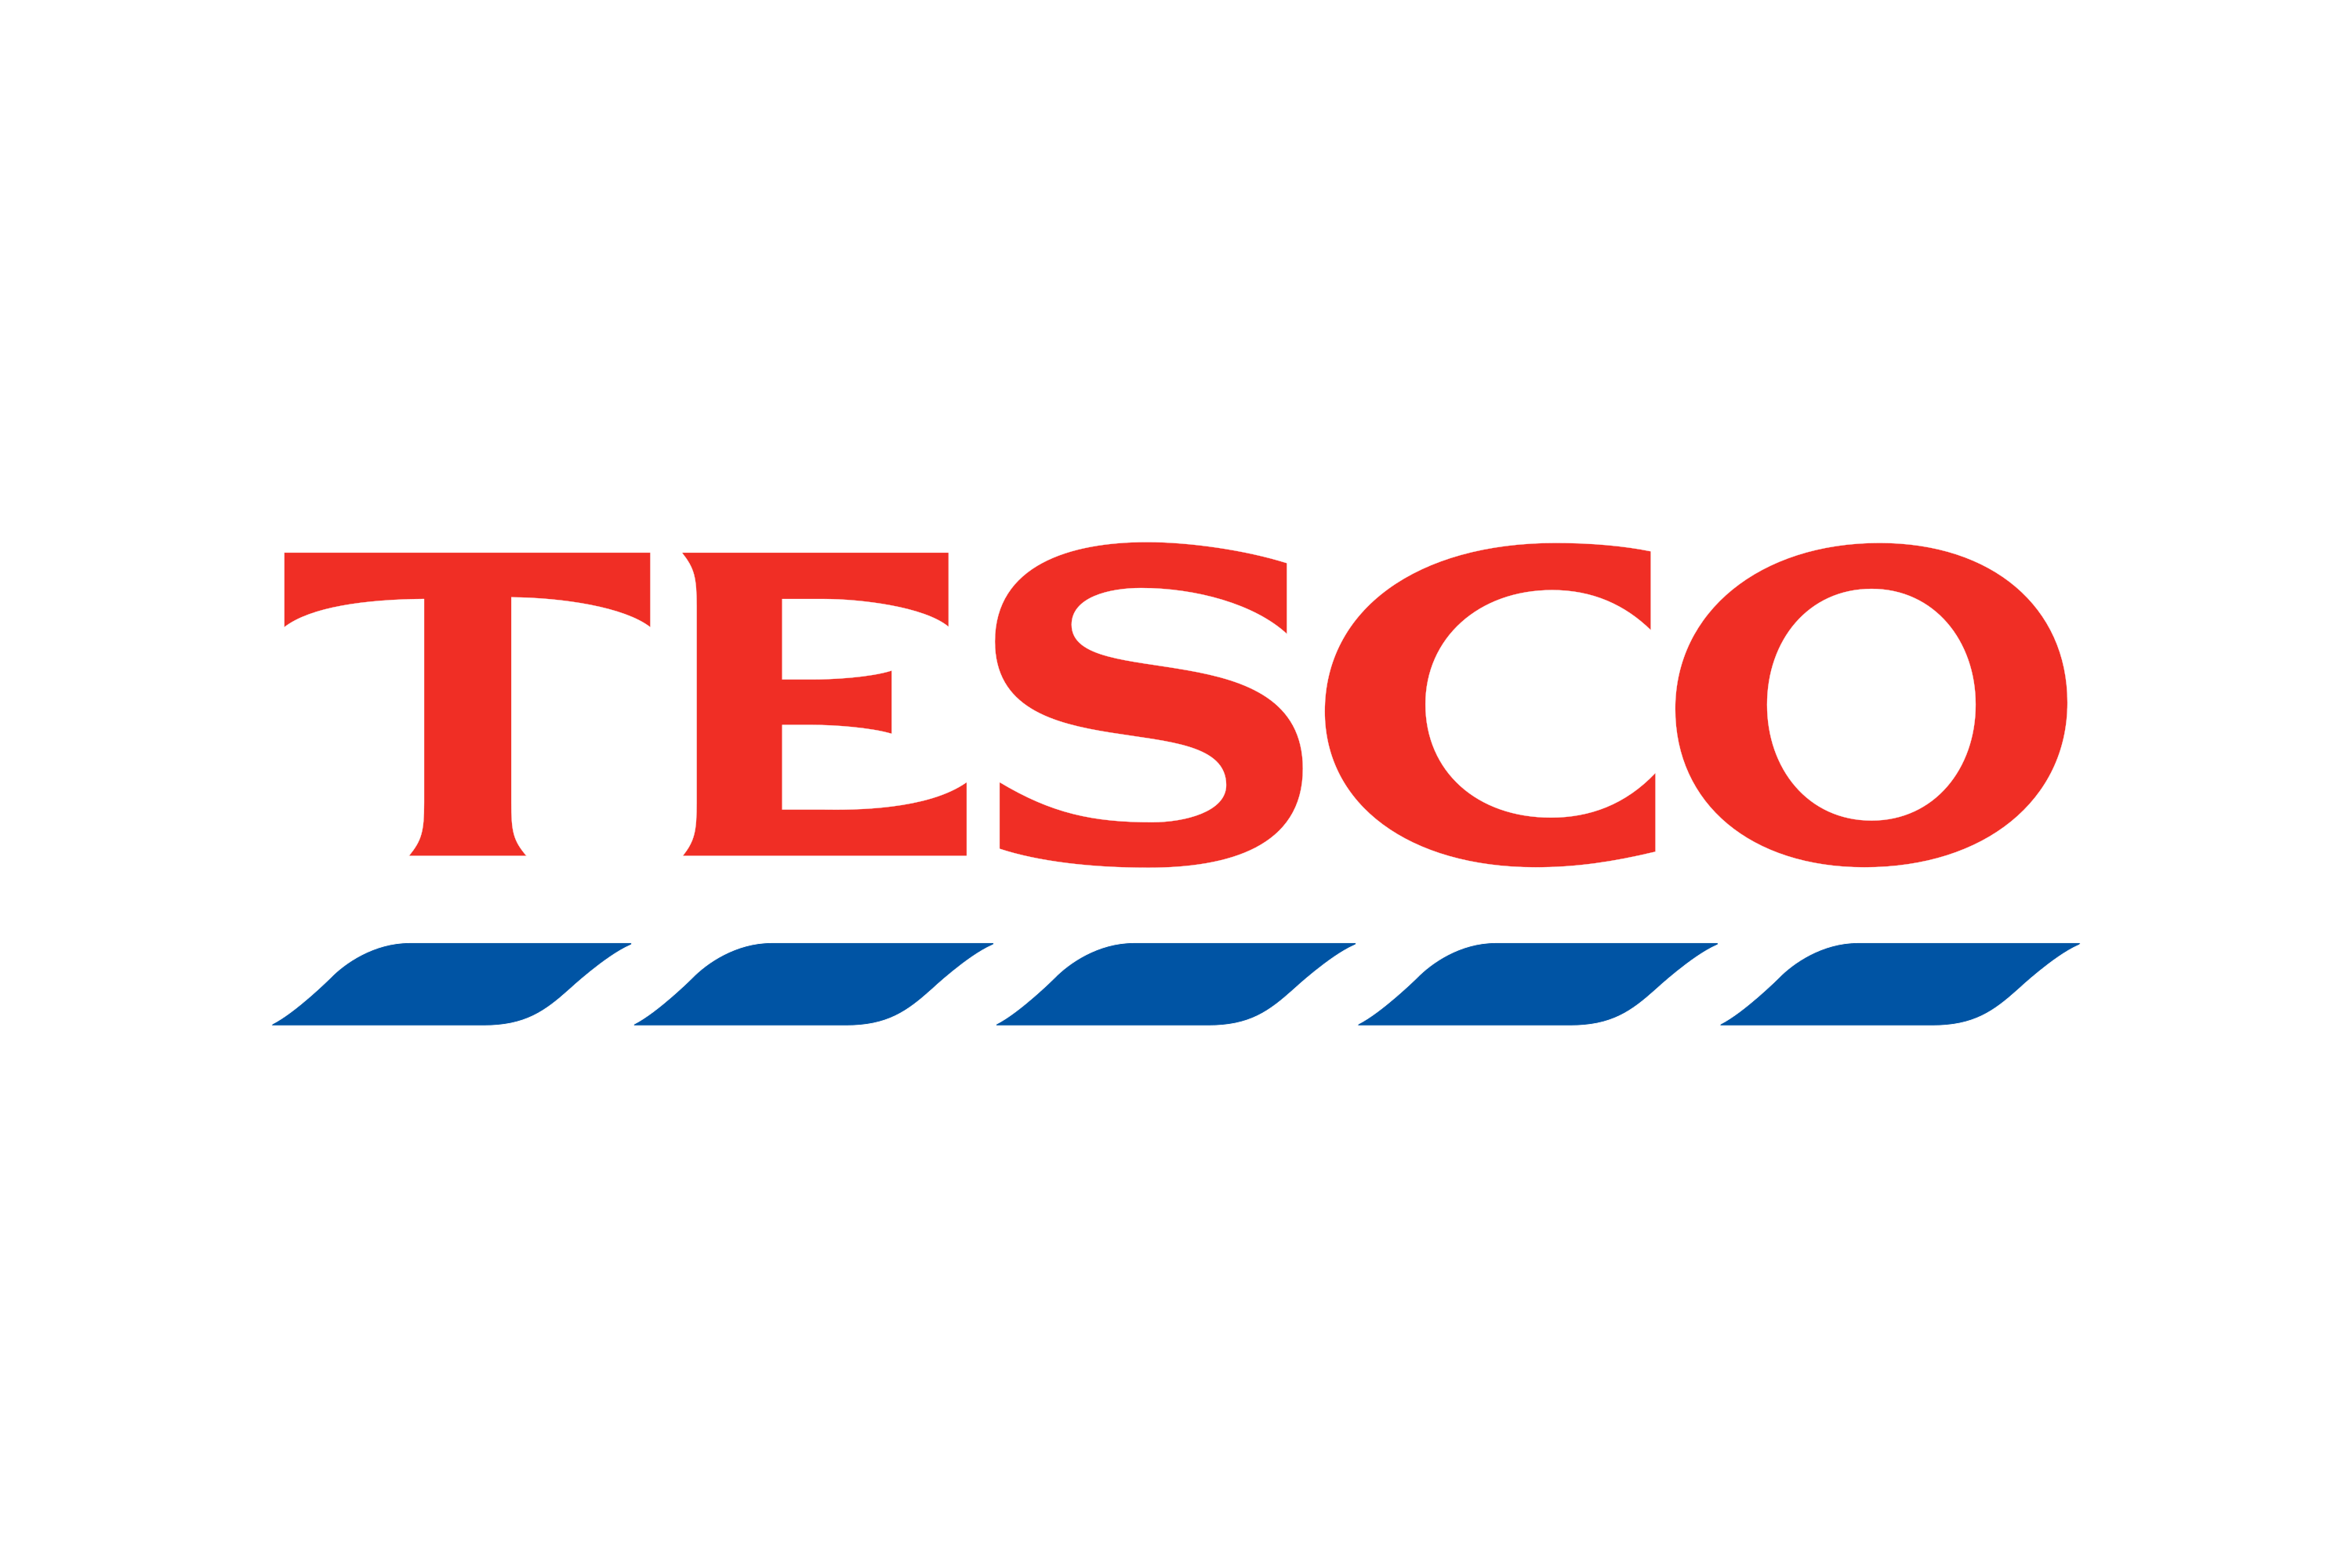 Download Tesco International operations Logo in SVG Vector or PNG File